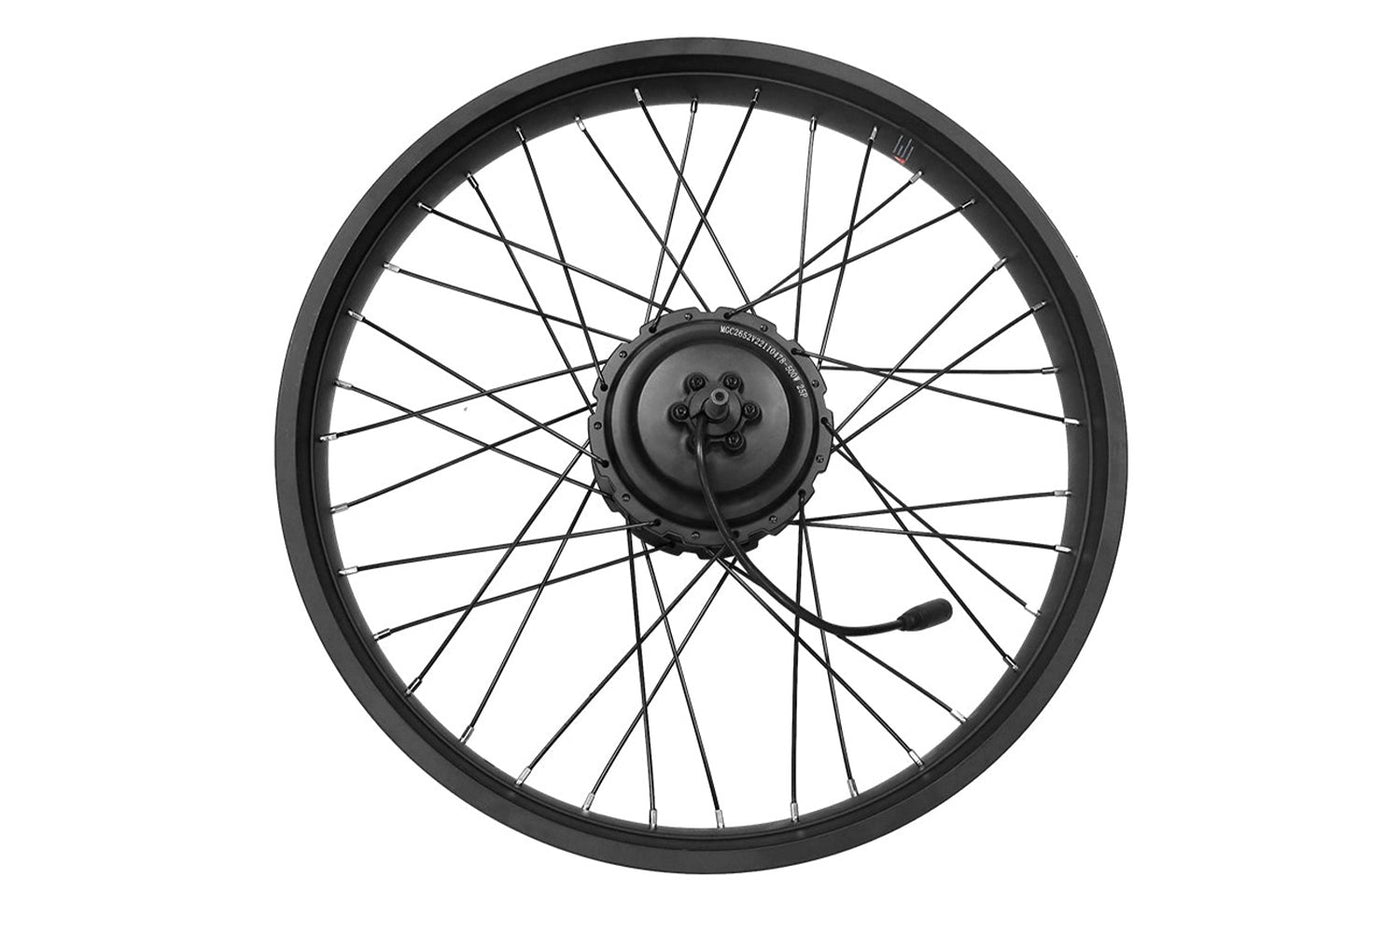 Magicycle Ebike Rear Wheel with Motor Kit